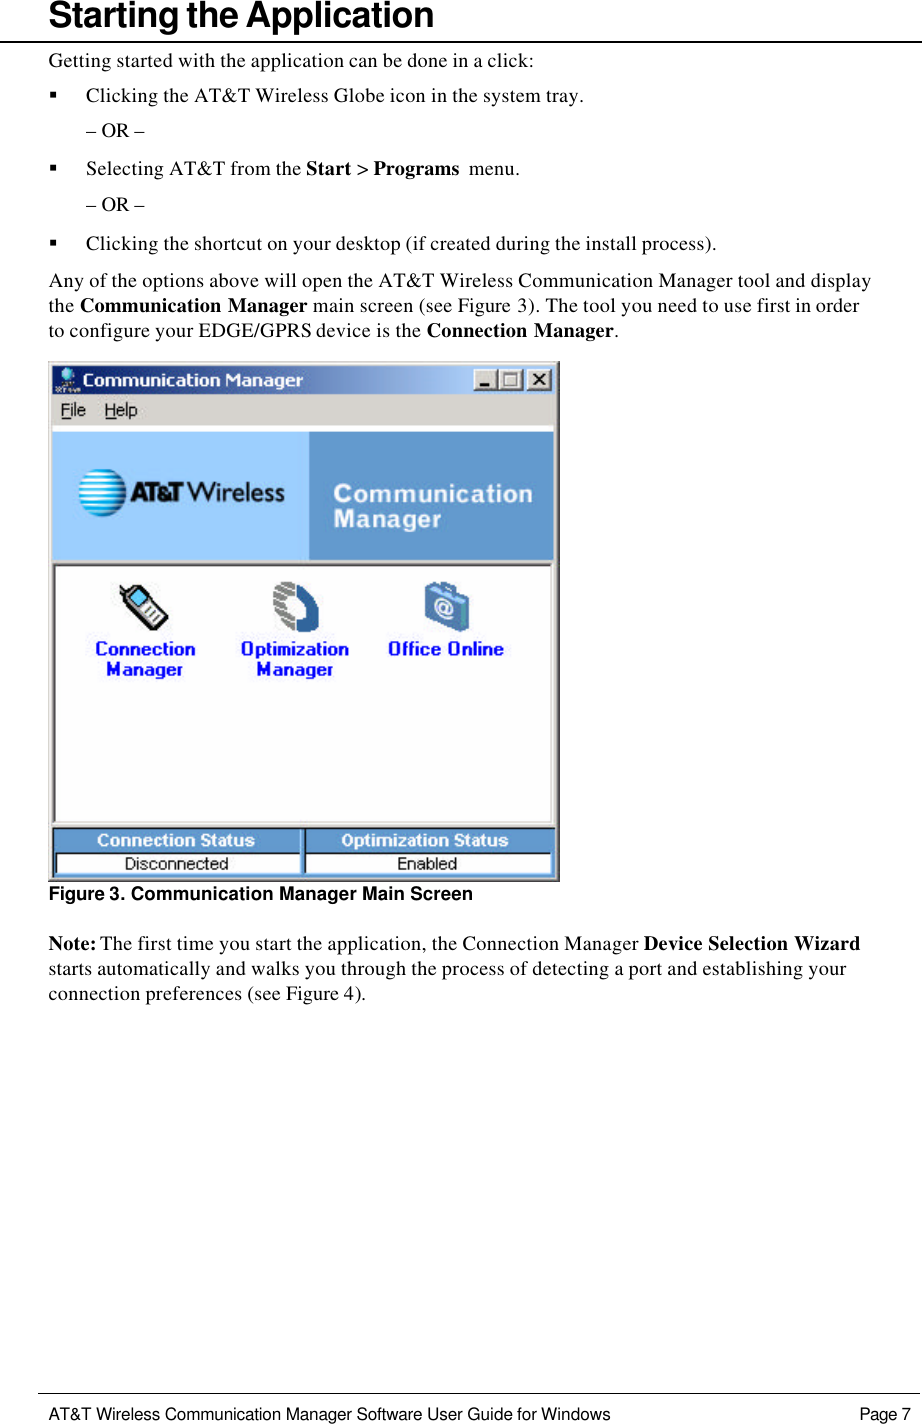   AT&amp;T Wireless Communication Manager Software User Guide for Windows    Page 7     Starting the Application Getting started with the application can be done in a click: § Clicking the AT&amp;T Wireless Globe icon in the system tray. – OR – § Selecting AT&amp;T from the Start &gt; Programs menu. – OR – § Clicking the shortcut on your desktop (if created during the install process). Any of the options above will open the AT&amp;T Wireless Communication Manager tool and display the Communication Manager main screen (see Figure 3). The tool you need to use first in order to configure your EDGE/GPRS device is the Connection Manager.  Figure 3. Communication Manager Main Screen Note: The first time you start the application, the Connection Manager Device Selection Wizard starts automatically and walks you through the process of detecting a port and establishing your connection preferences (see Figure 4).  